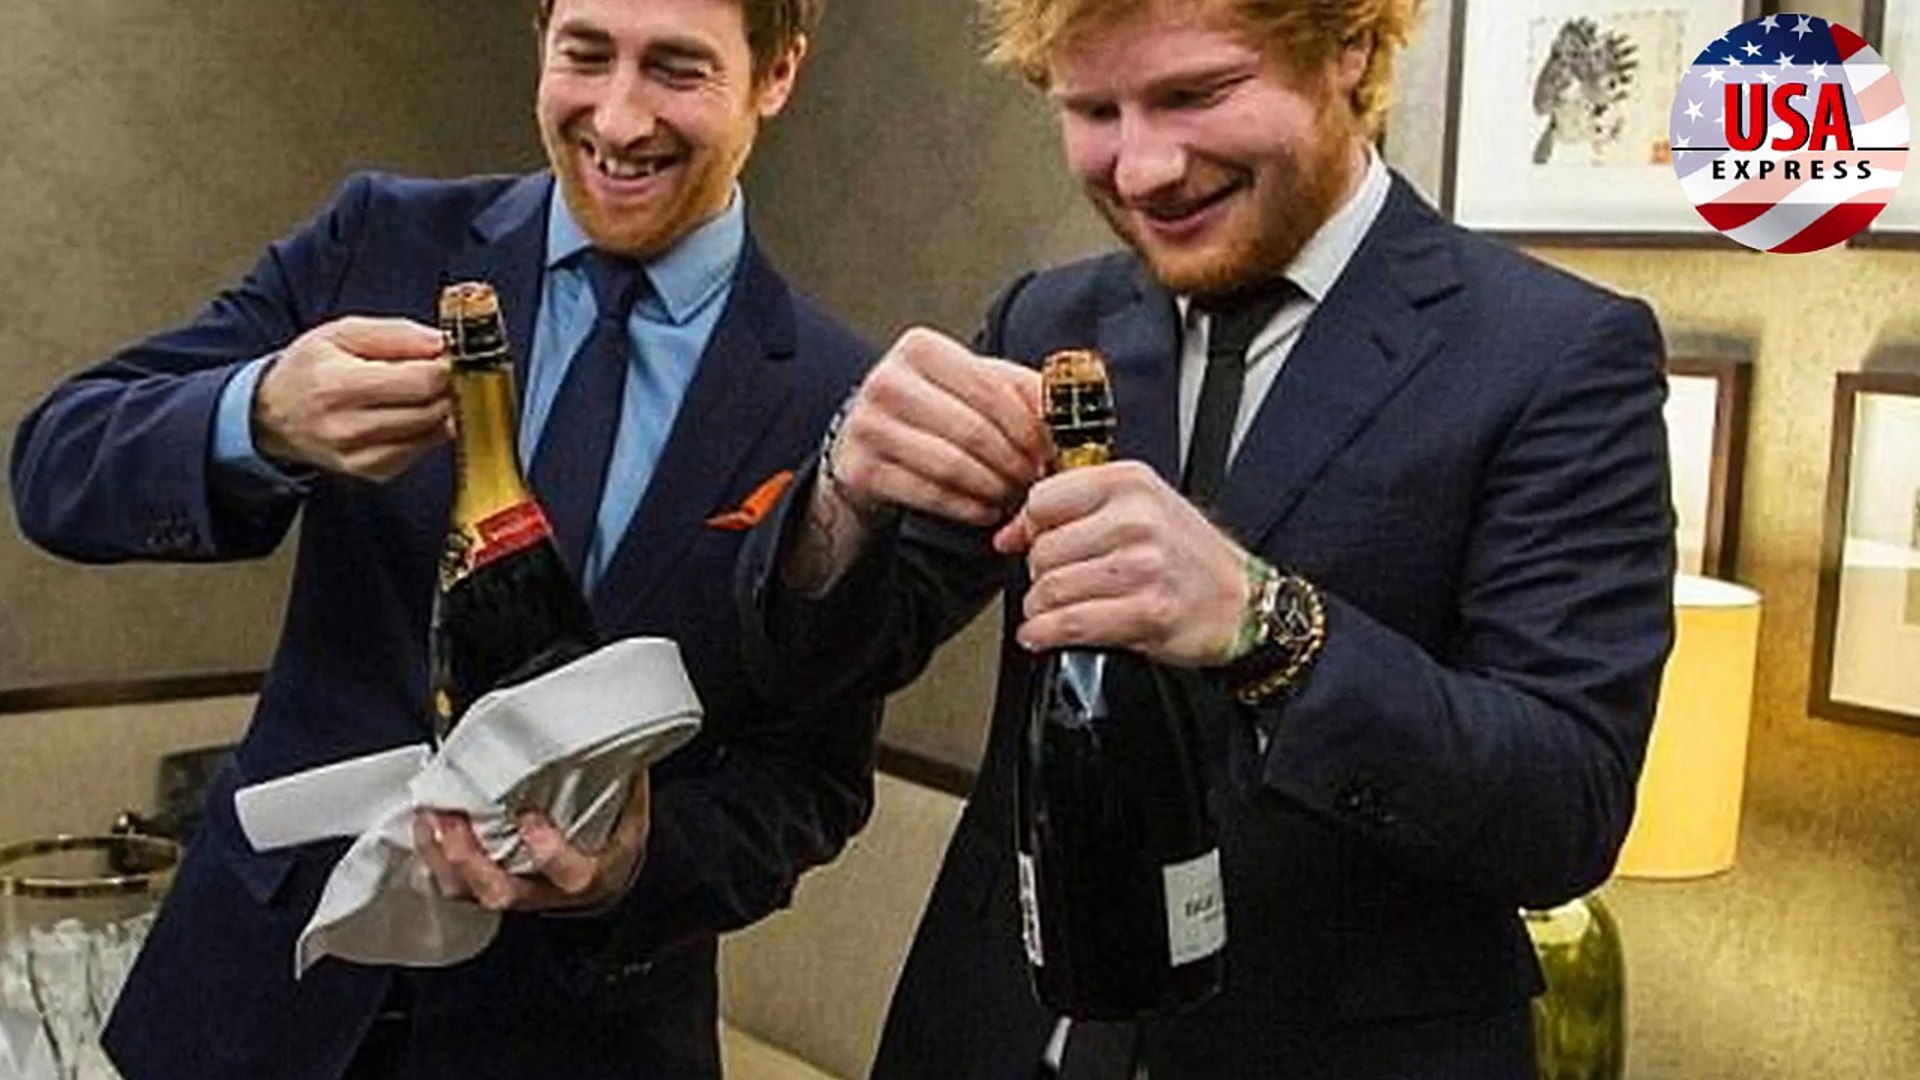 Ed Sheeran 'teams up' with Prince Harry on new music project